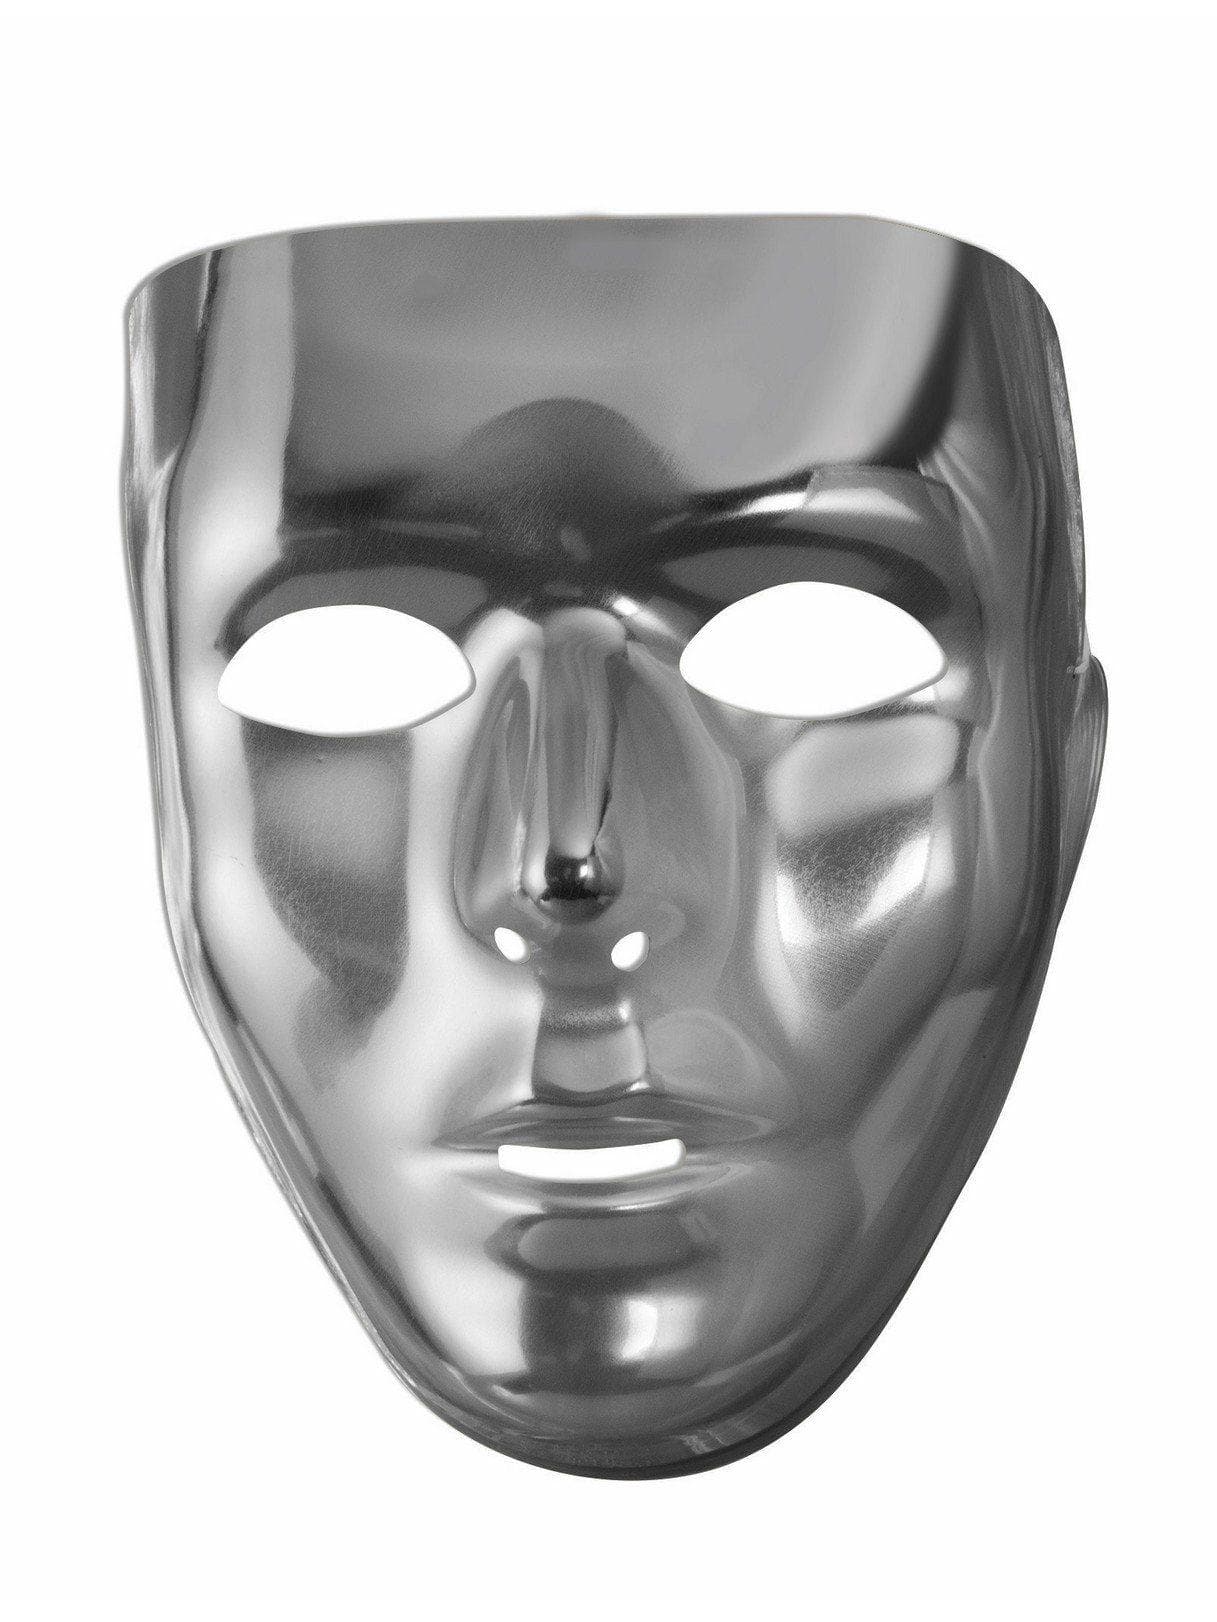 Silver Face Mask - costumes.com